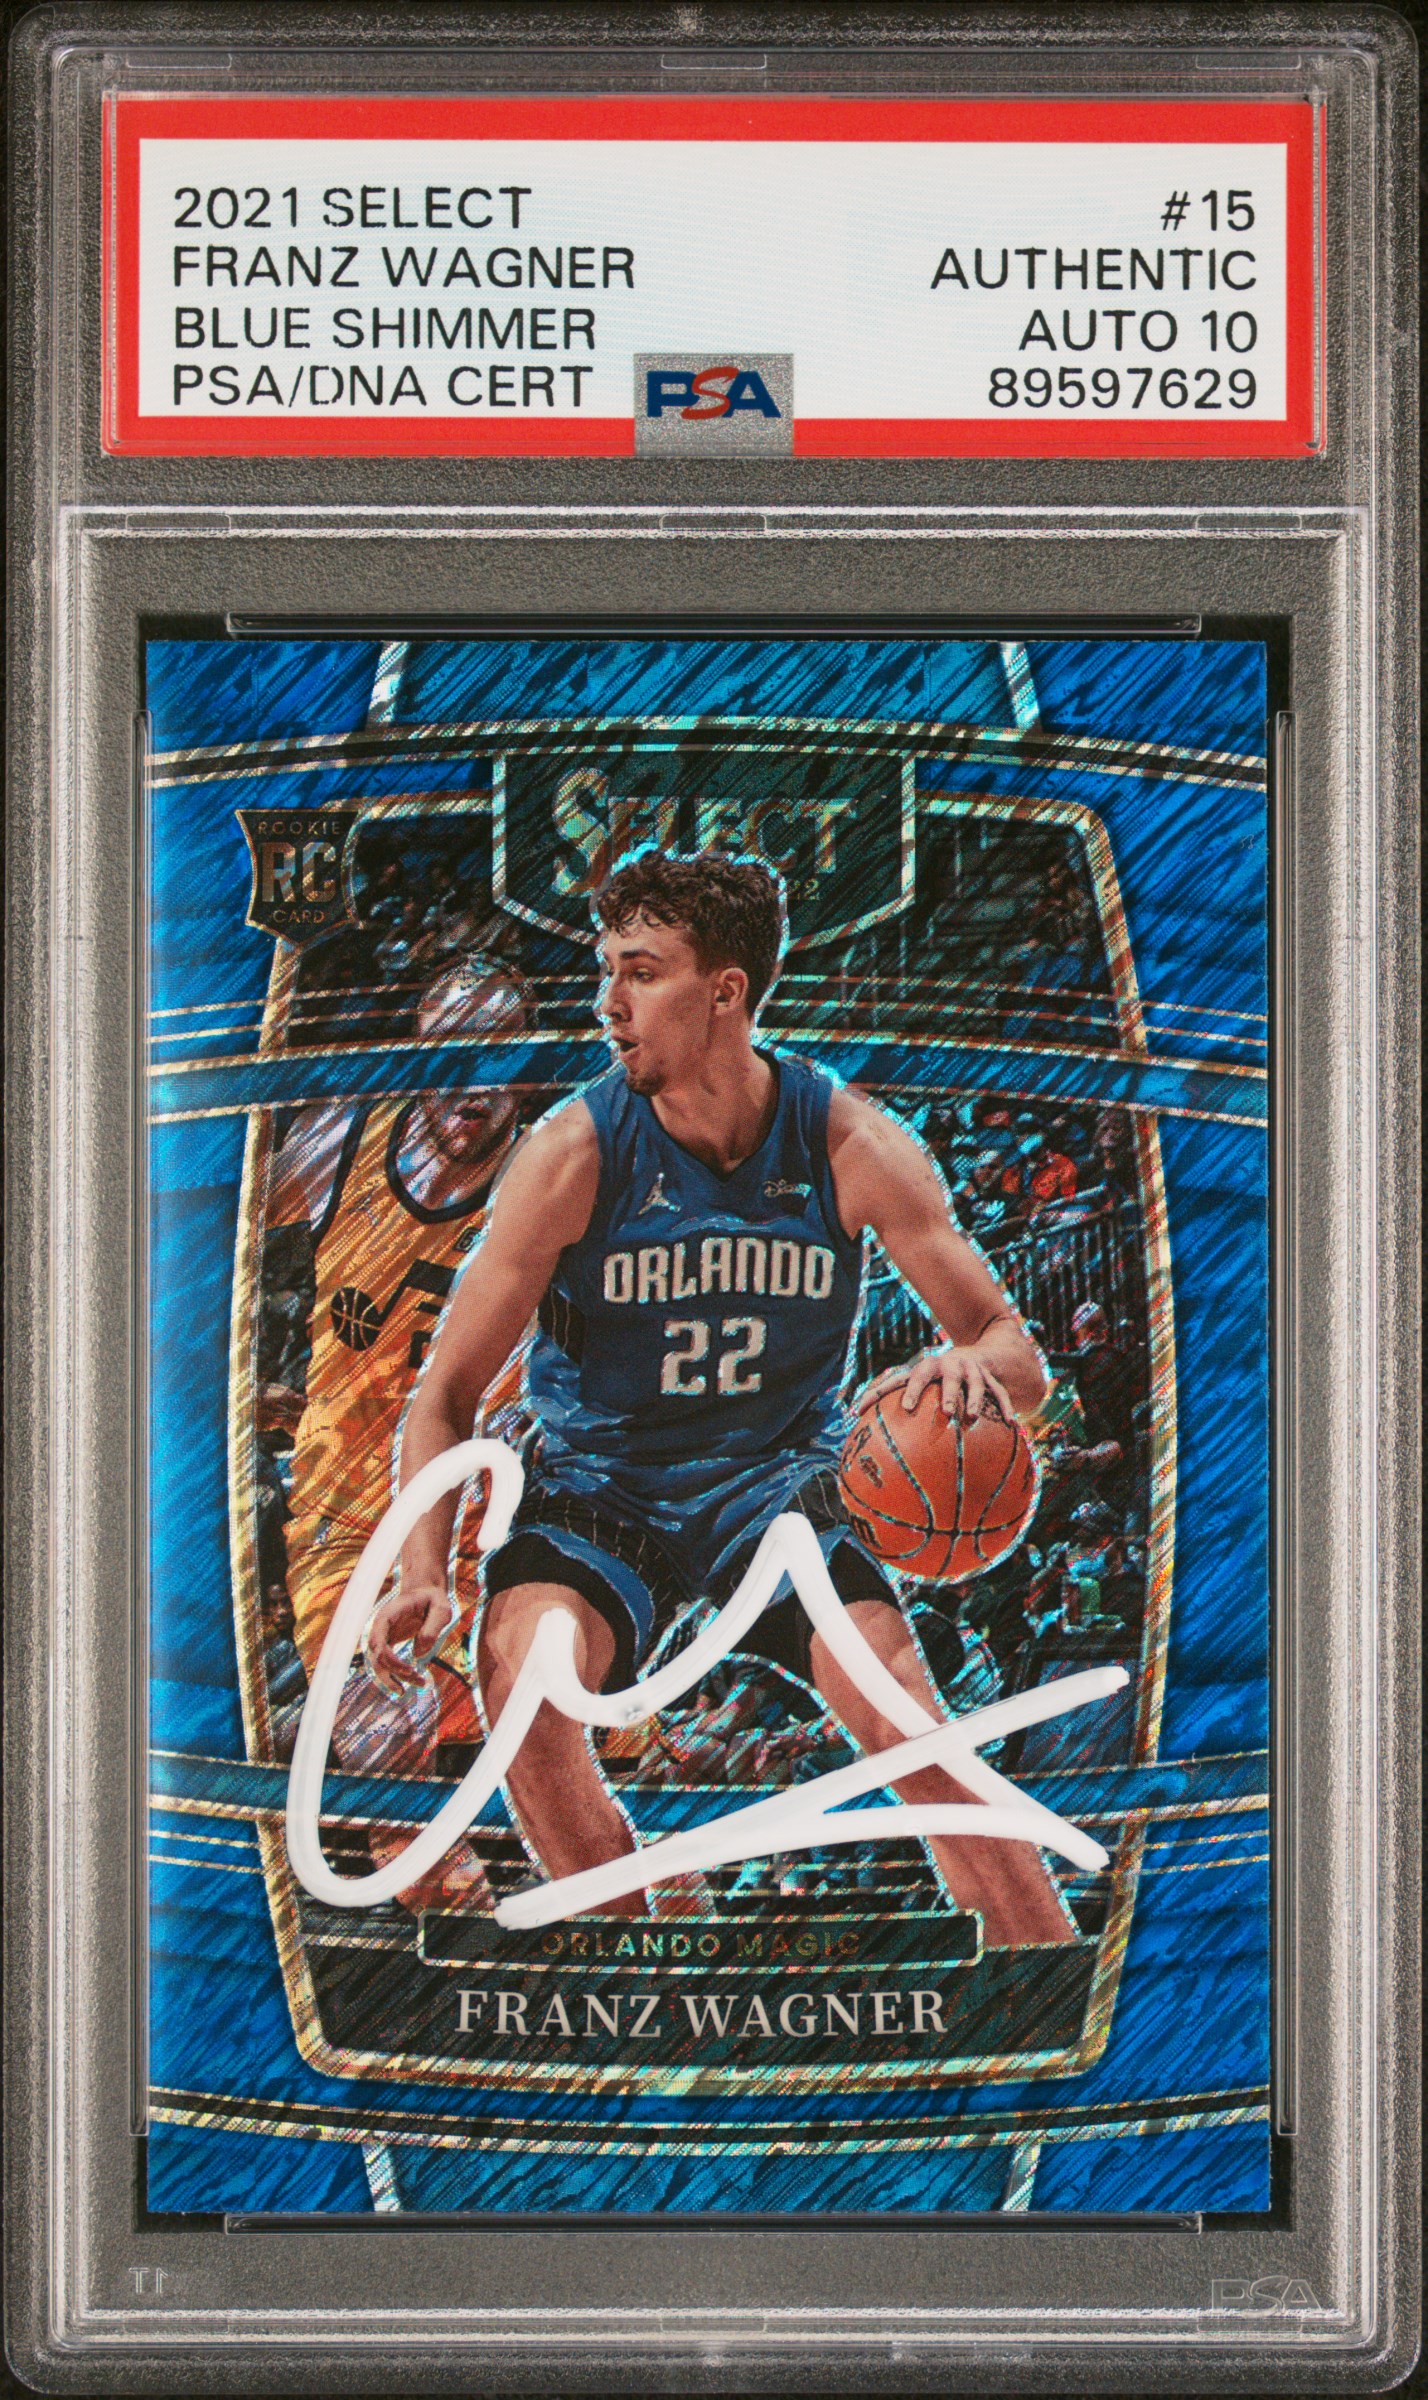 Franz Wagner 2021 Select Blue Shimmer Signed Rookie Card #15 Auto PSA 10 9597629